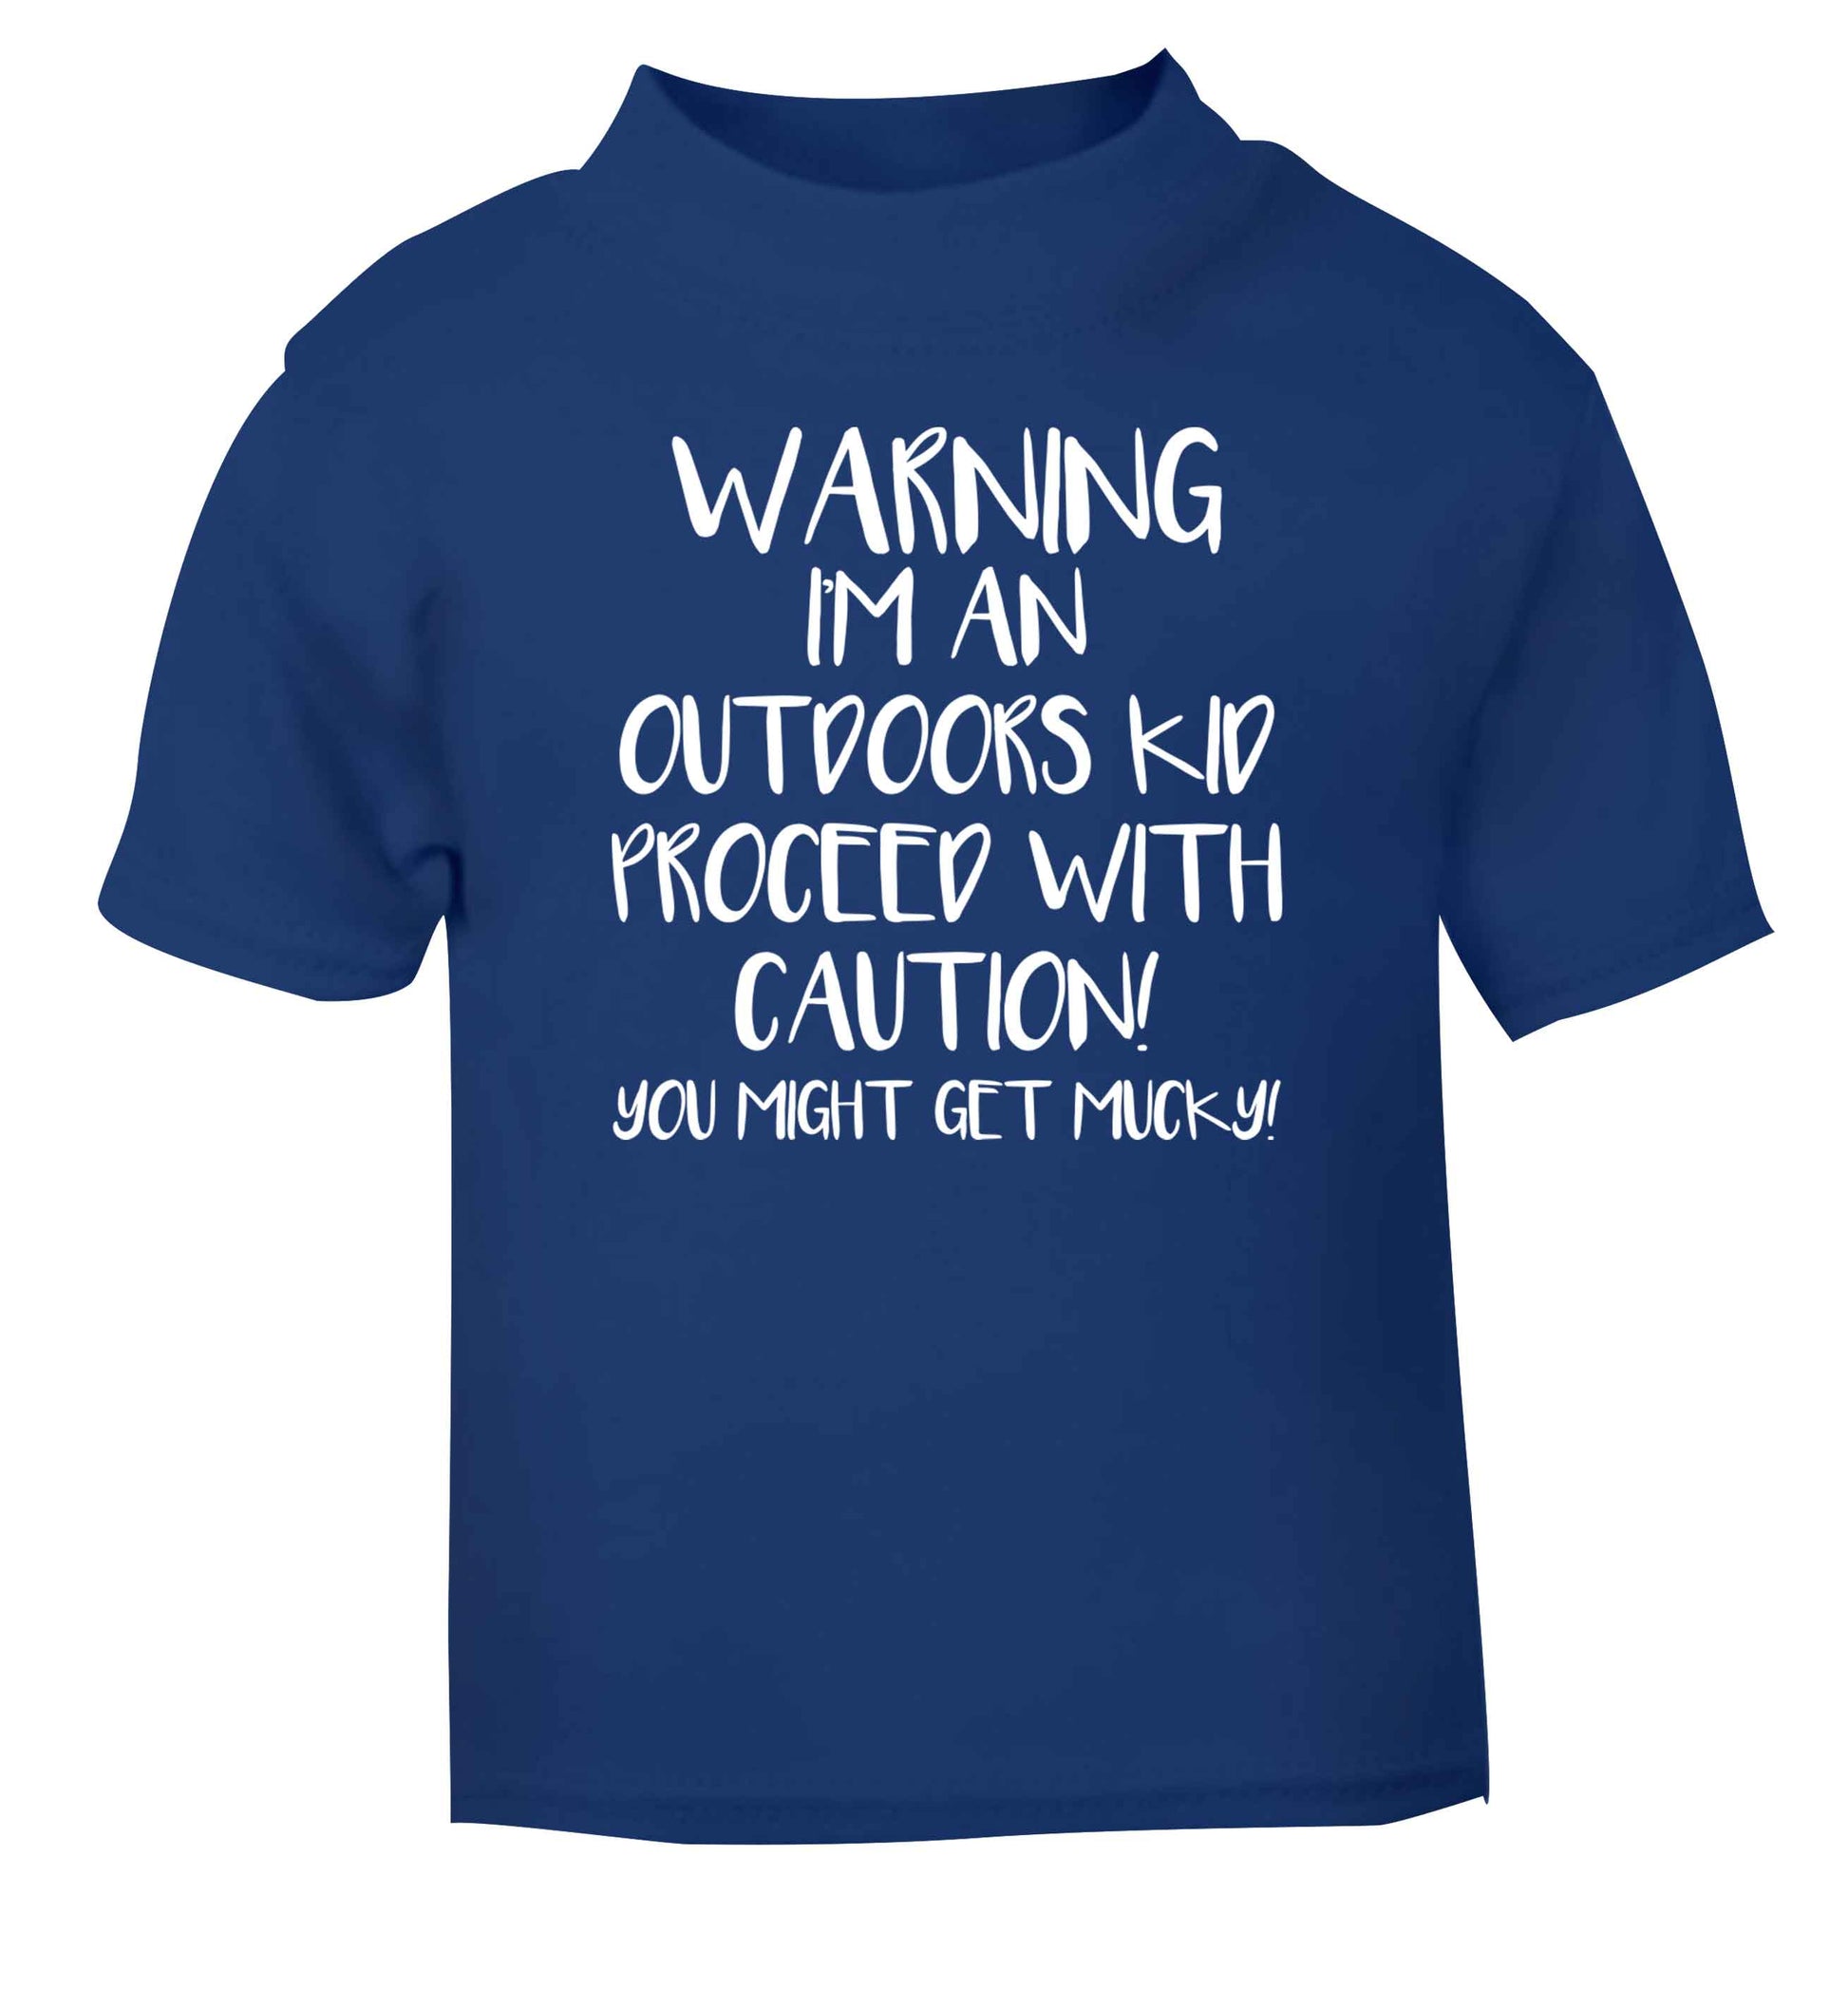 Warning I'm an outdoors kid! Proceed with caution you might get mucky blue Baby Toddler Tshirt 2 Years